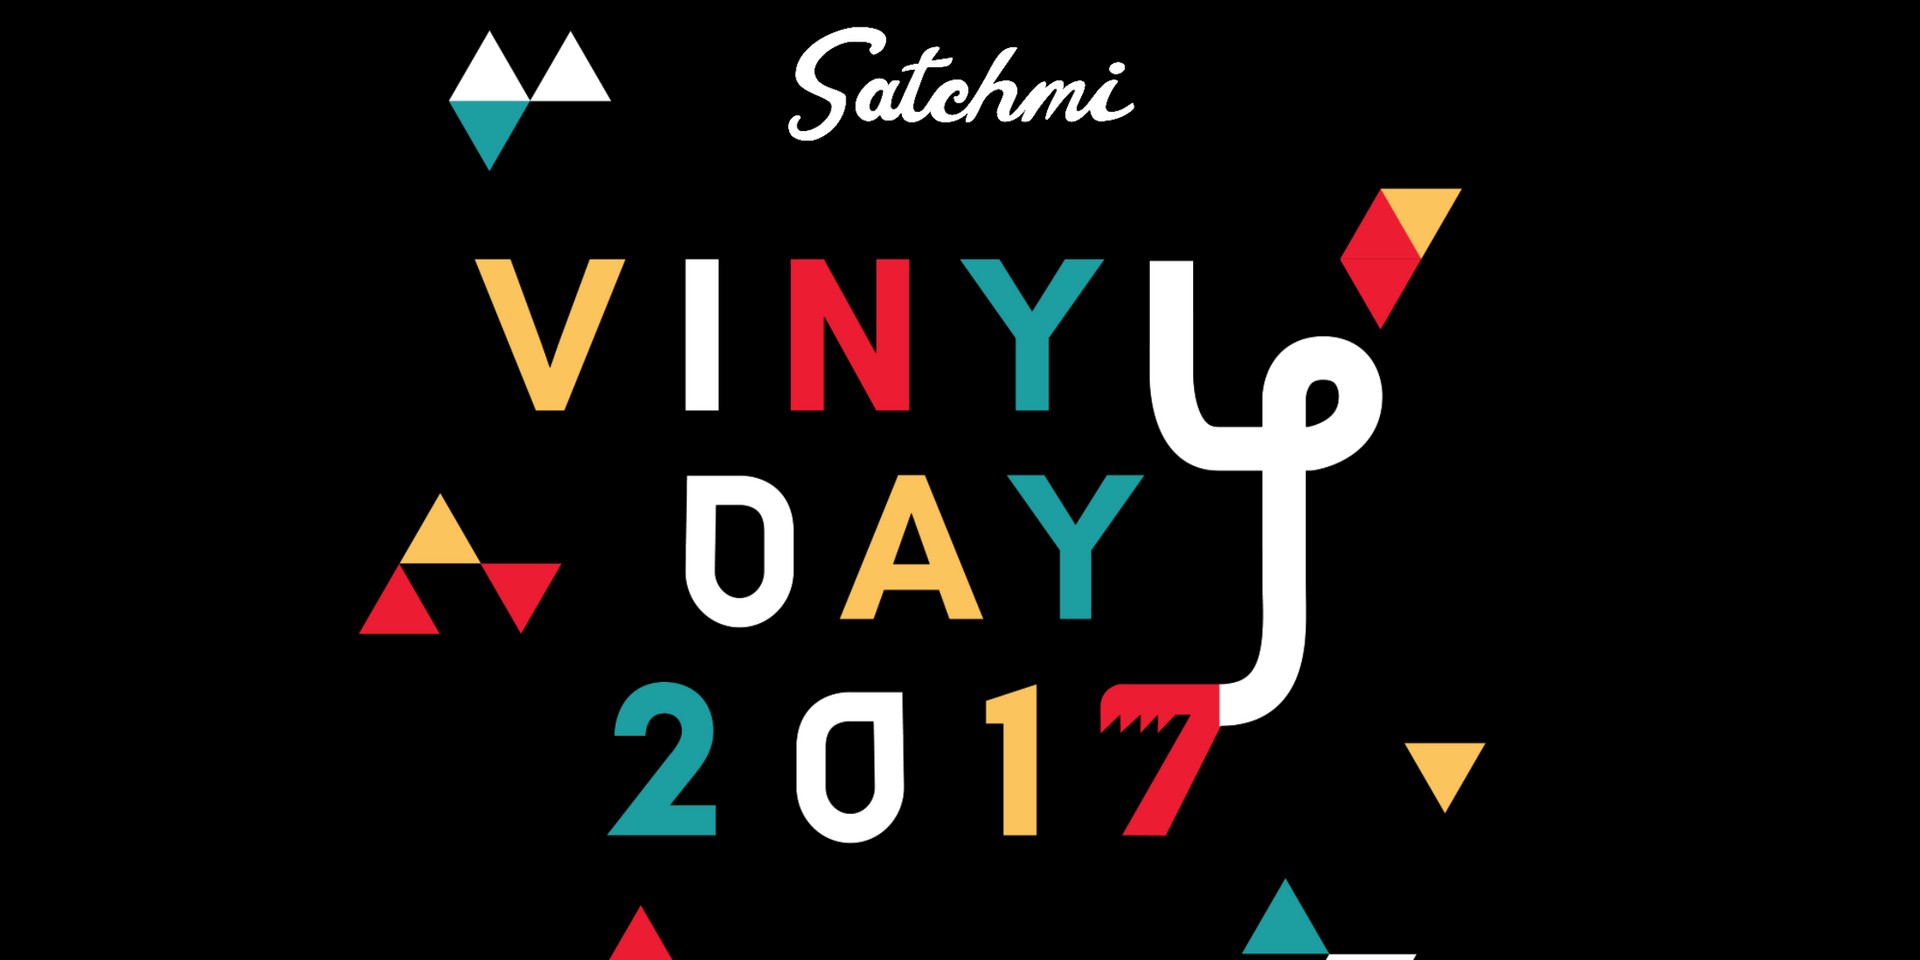 Satchmi Vinyl Day to celebrate its fifth year at Green Sun